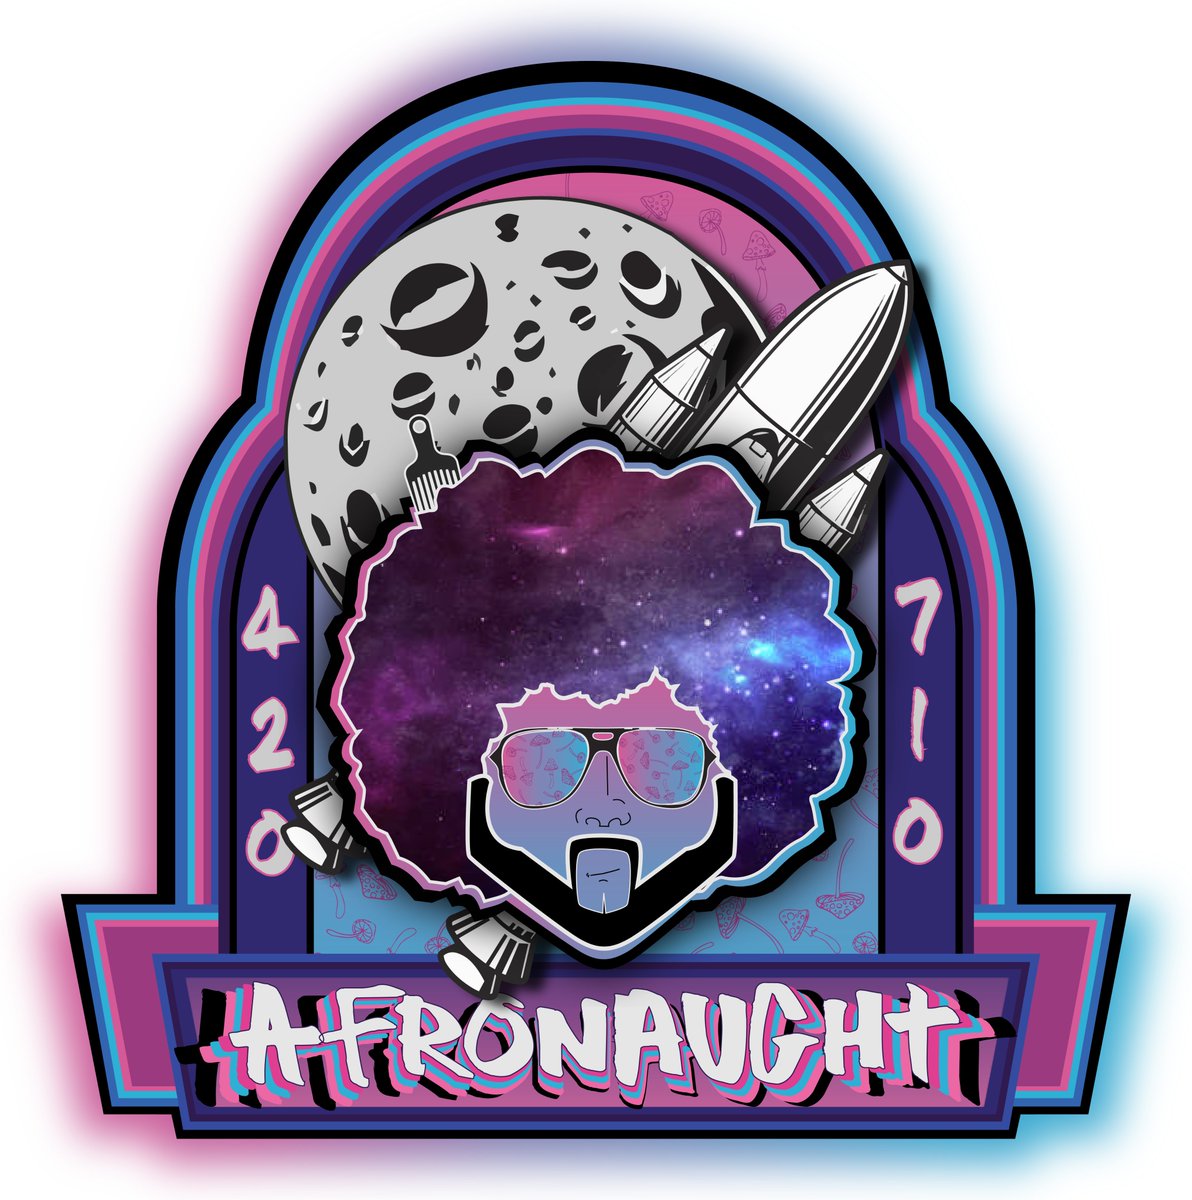 Afronaught is live on twitch

twitch.tv/afronaught

#streaming  #Cyberpunk2077 #newstreamer #chaoticneutralgamers